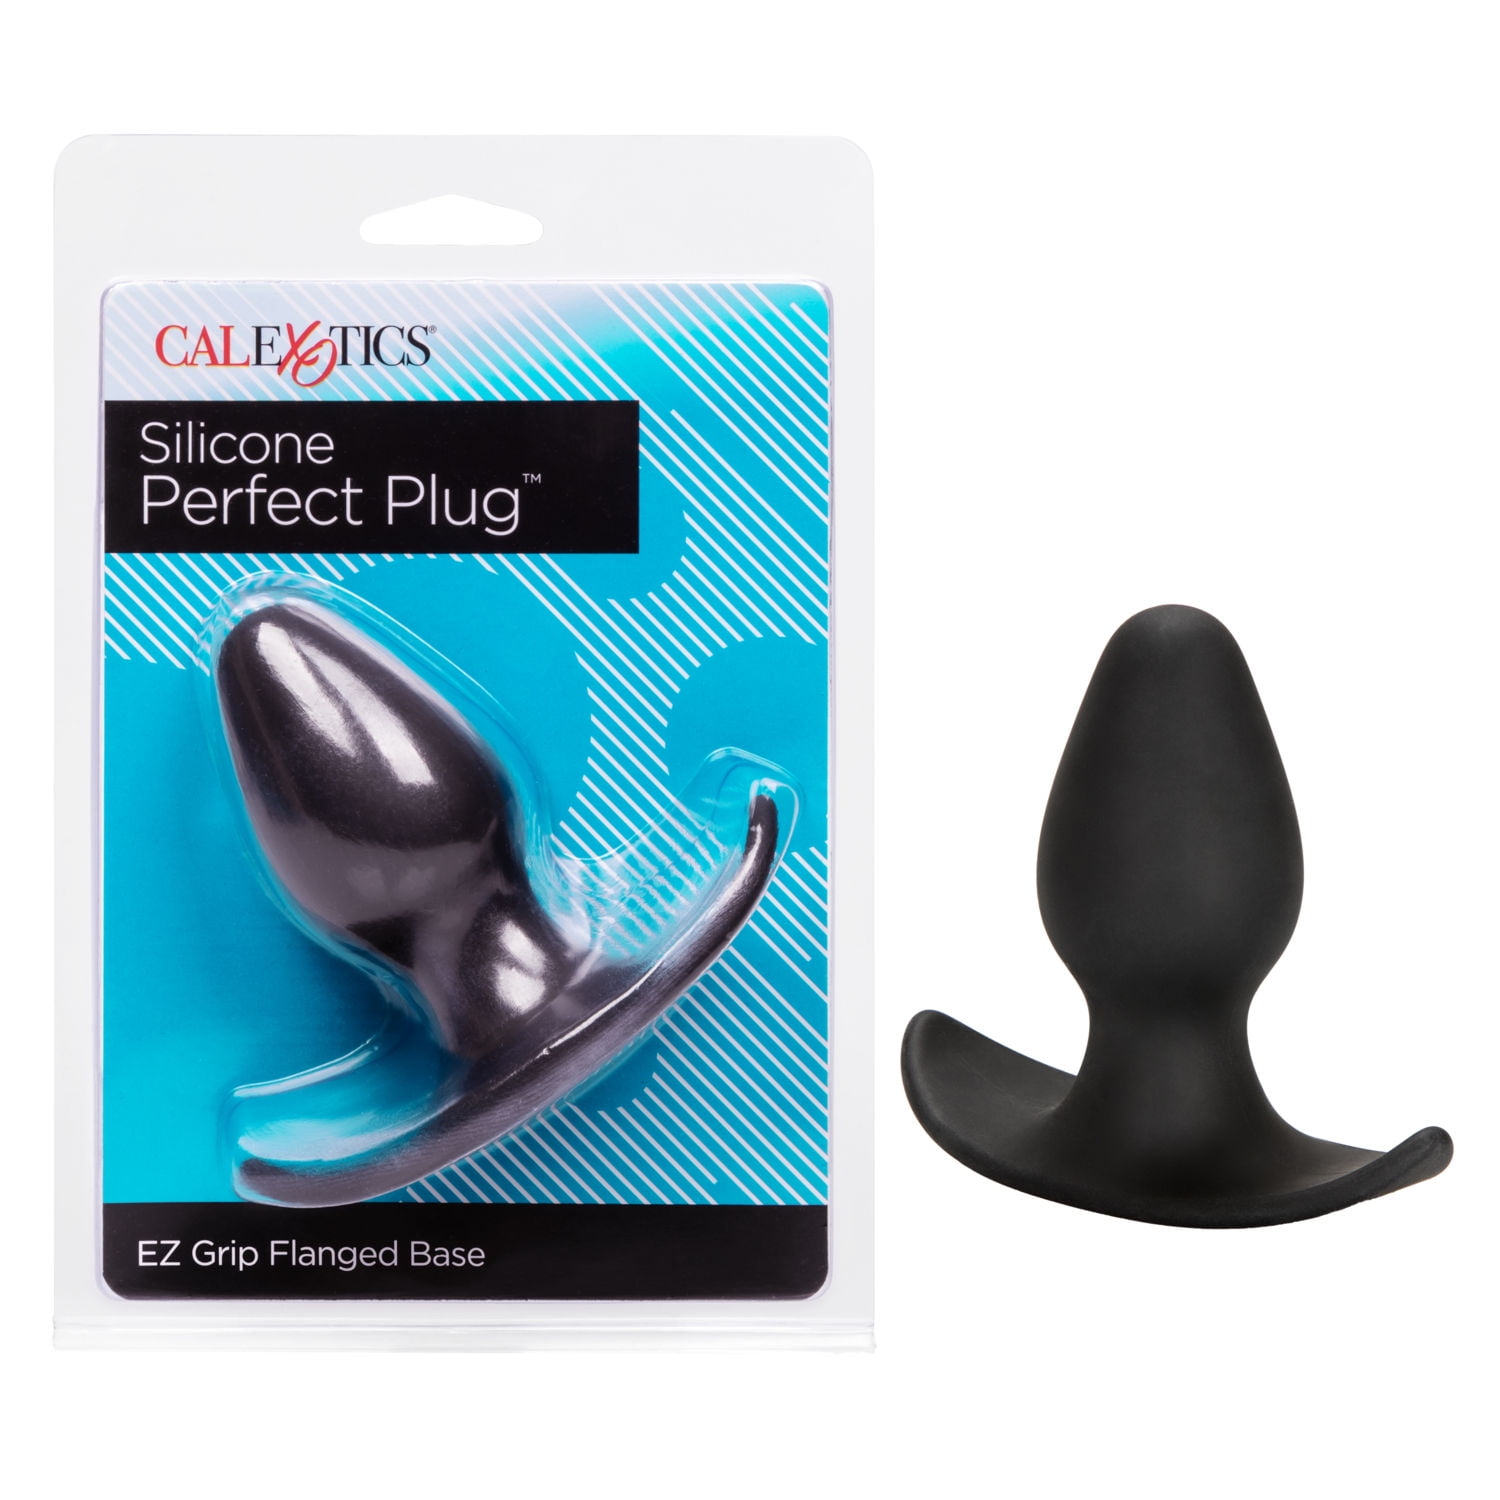 What Is A Butt Plug Used For